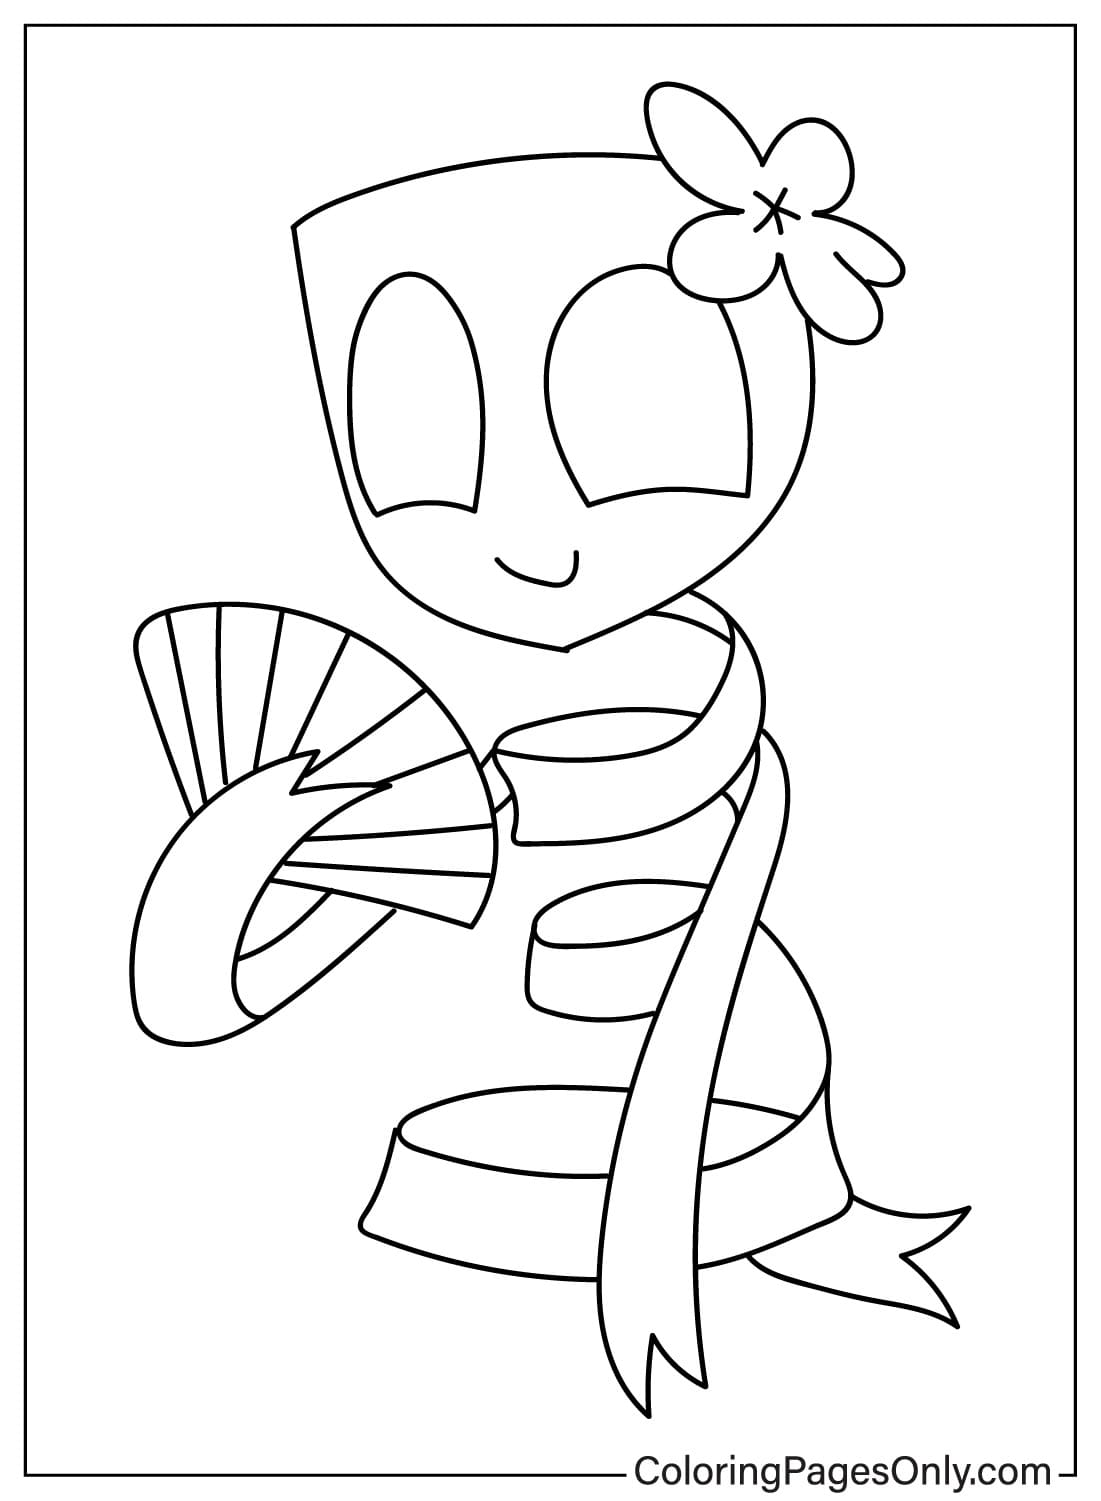 Cute Gangle Coloring Page - Free ...